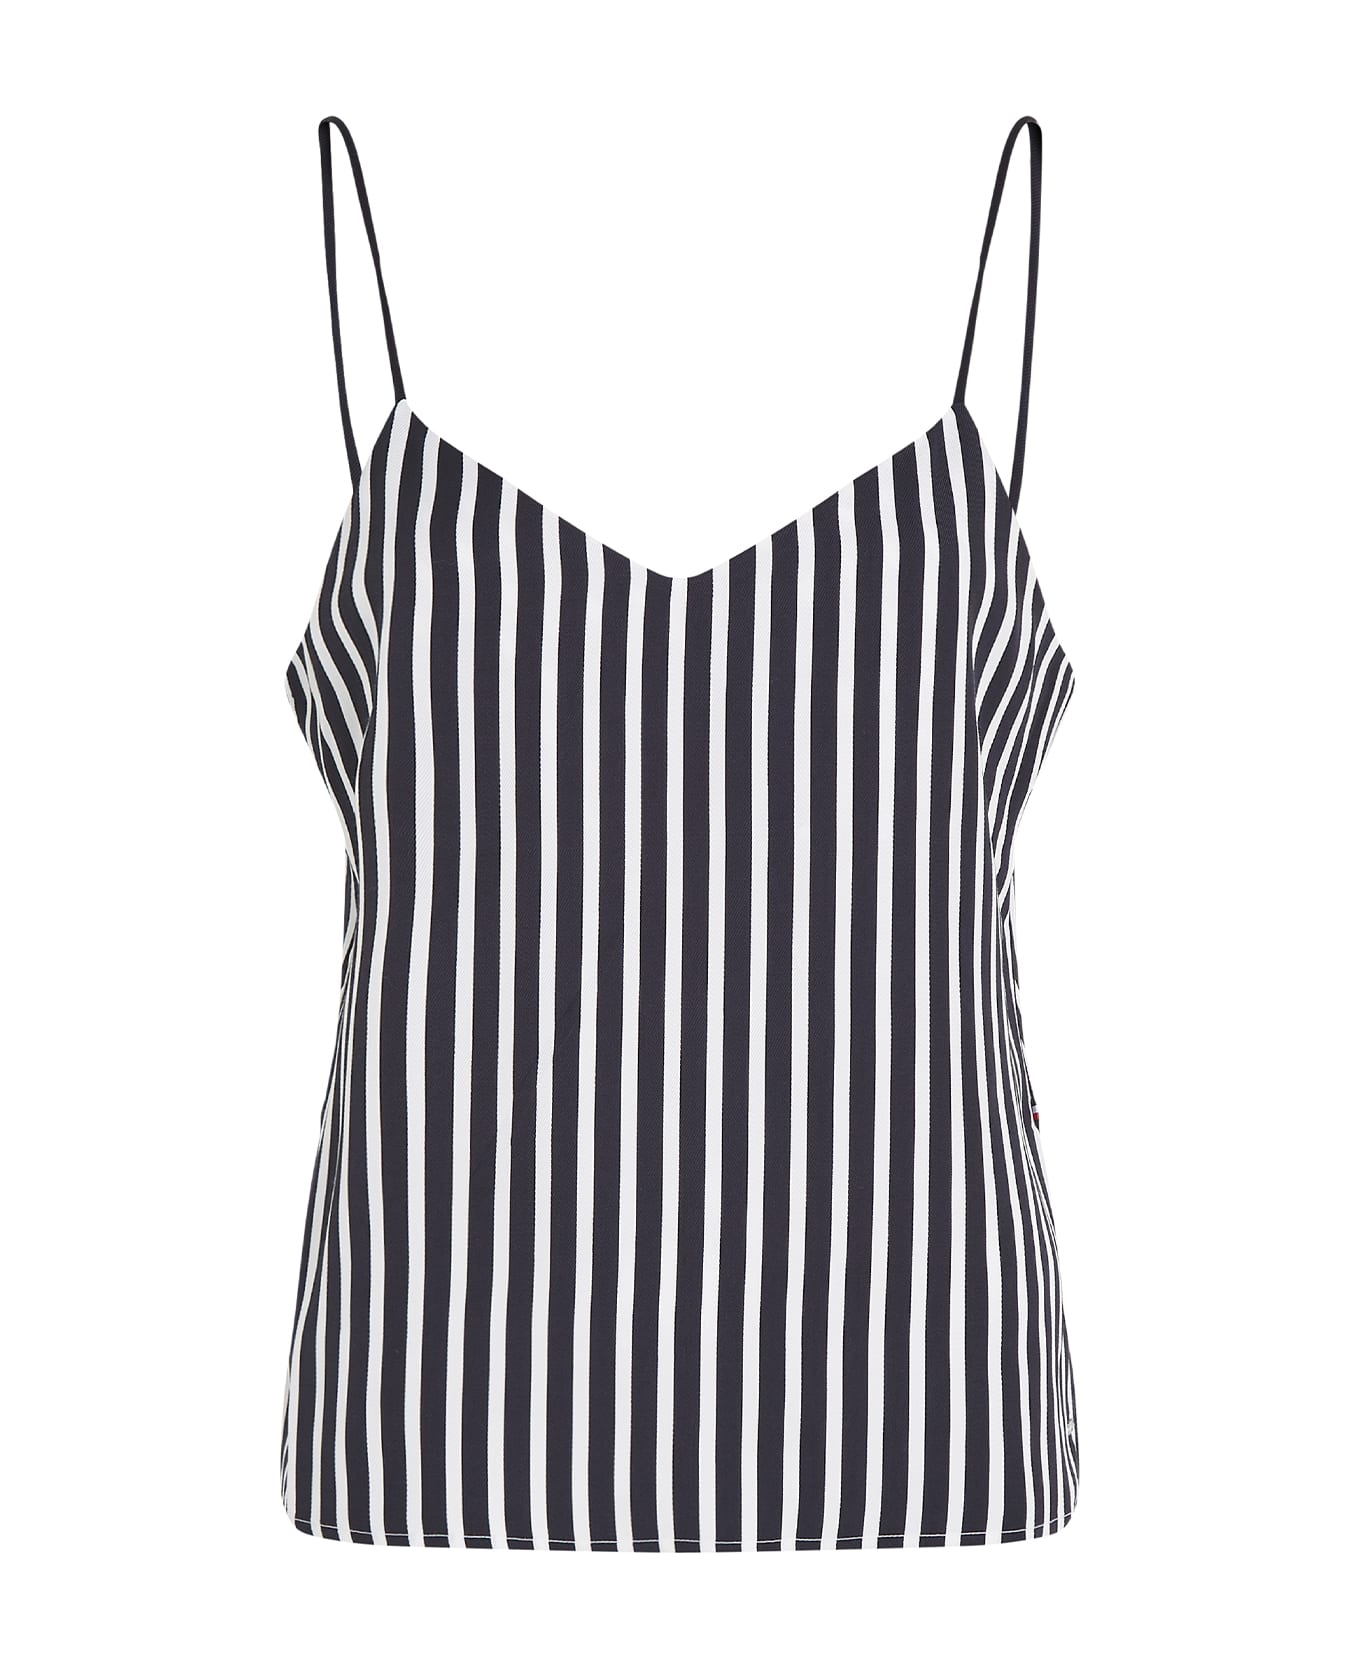 Tommy Hilfiger Striped Tank Top With Thin Straps - BOLD STP/DESERT SKY キャミソール